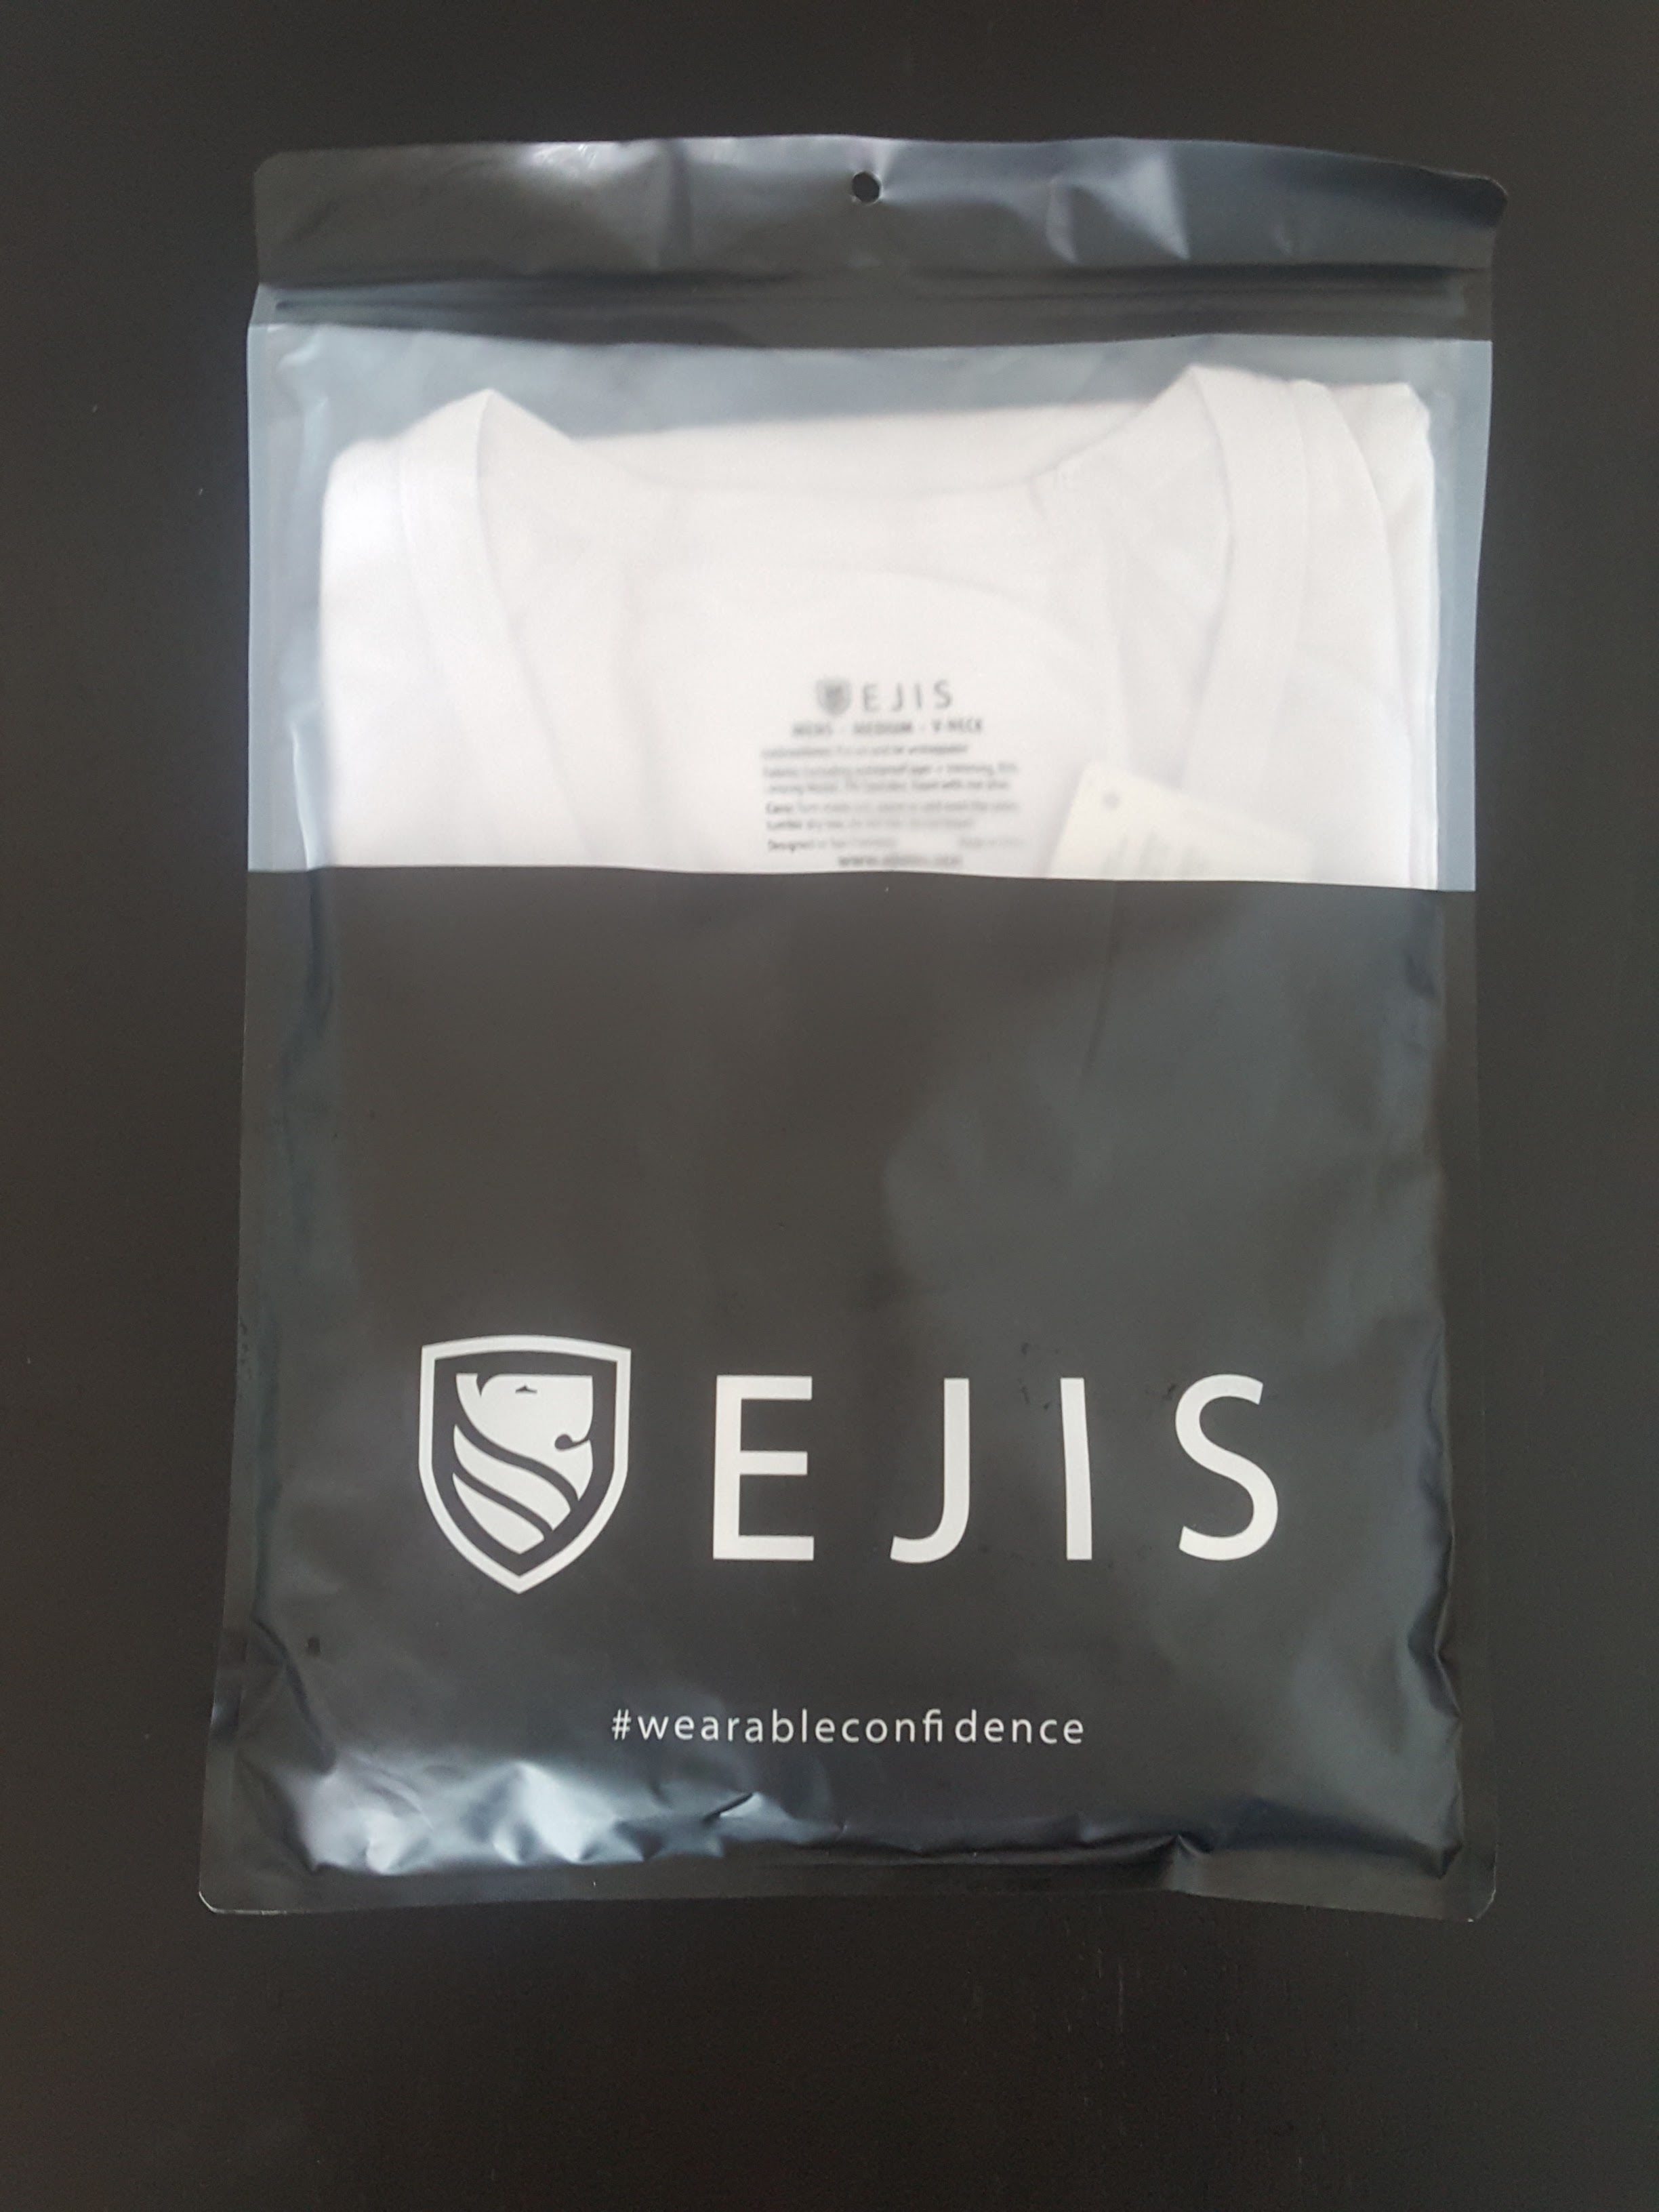 Ejis Sweat Proof Undershirts and Boxer Briefs. Get Some Wearable  Confidence! 